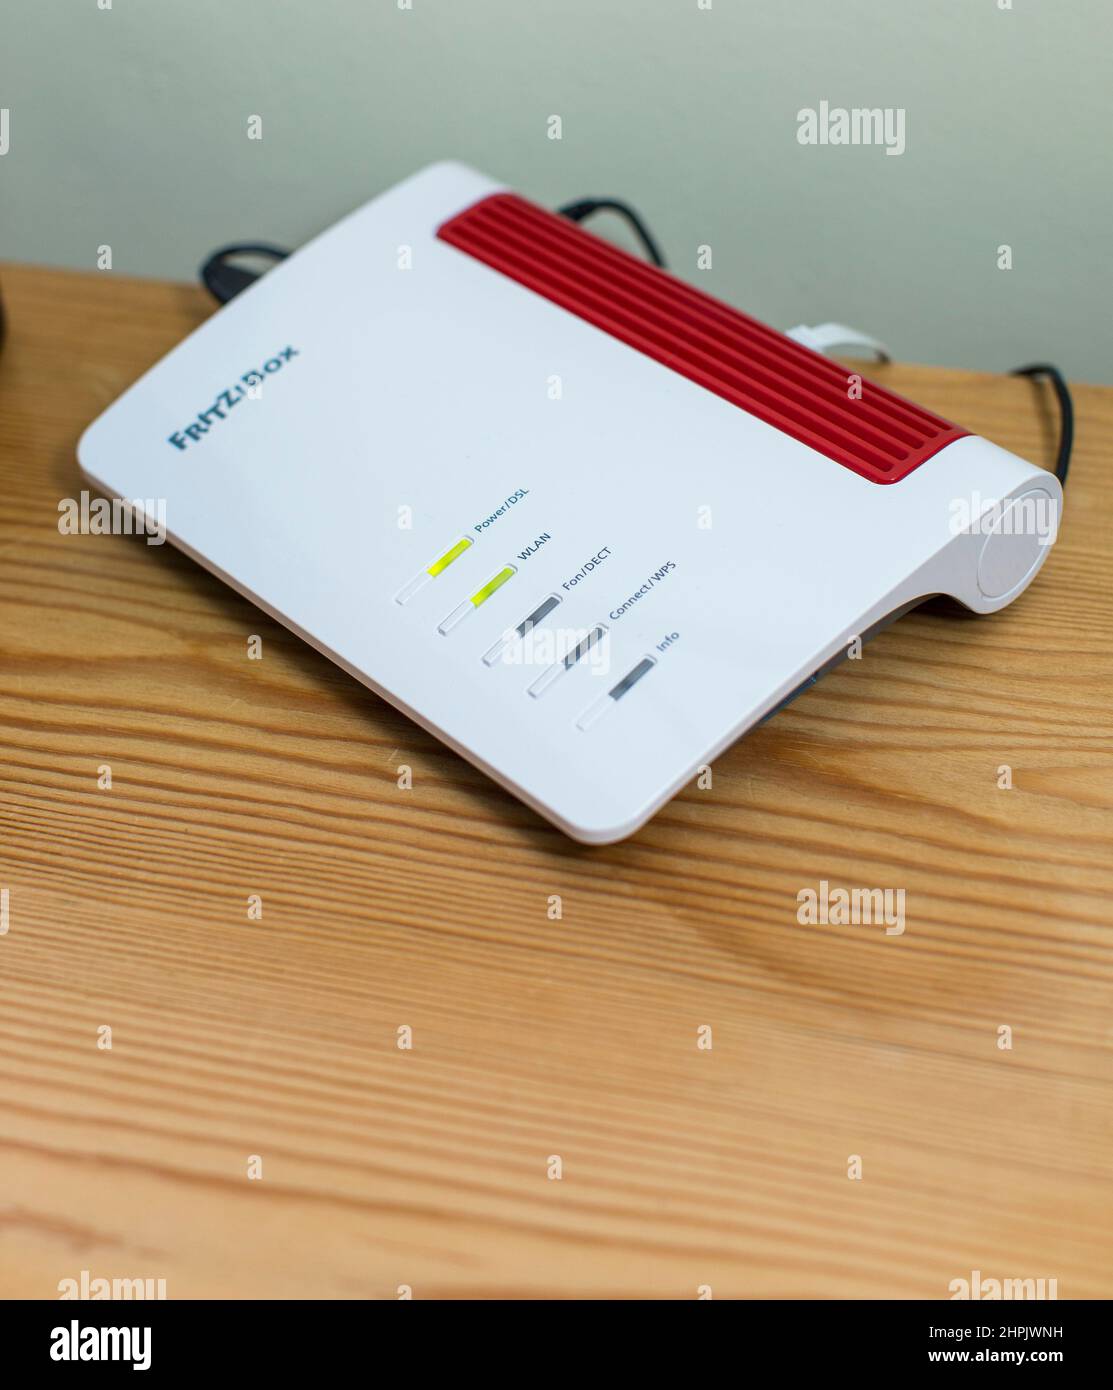 Fritz!Box wireless router is designed to give a fast and reliable broadband  internet connection with features including parental controls and easy  'plug-in and go' set up. Using Wireless AC and Wireless N,